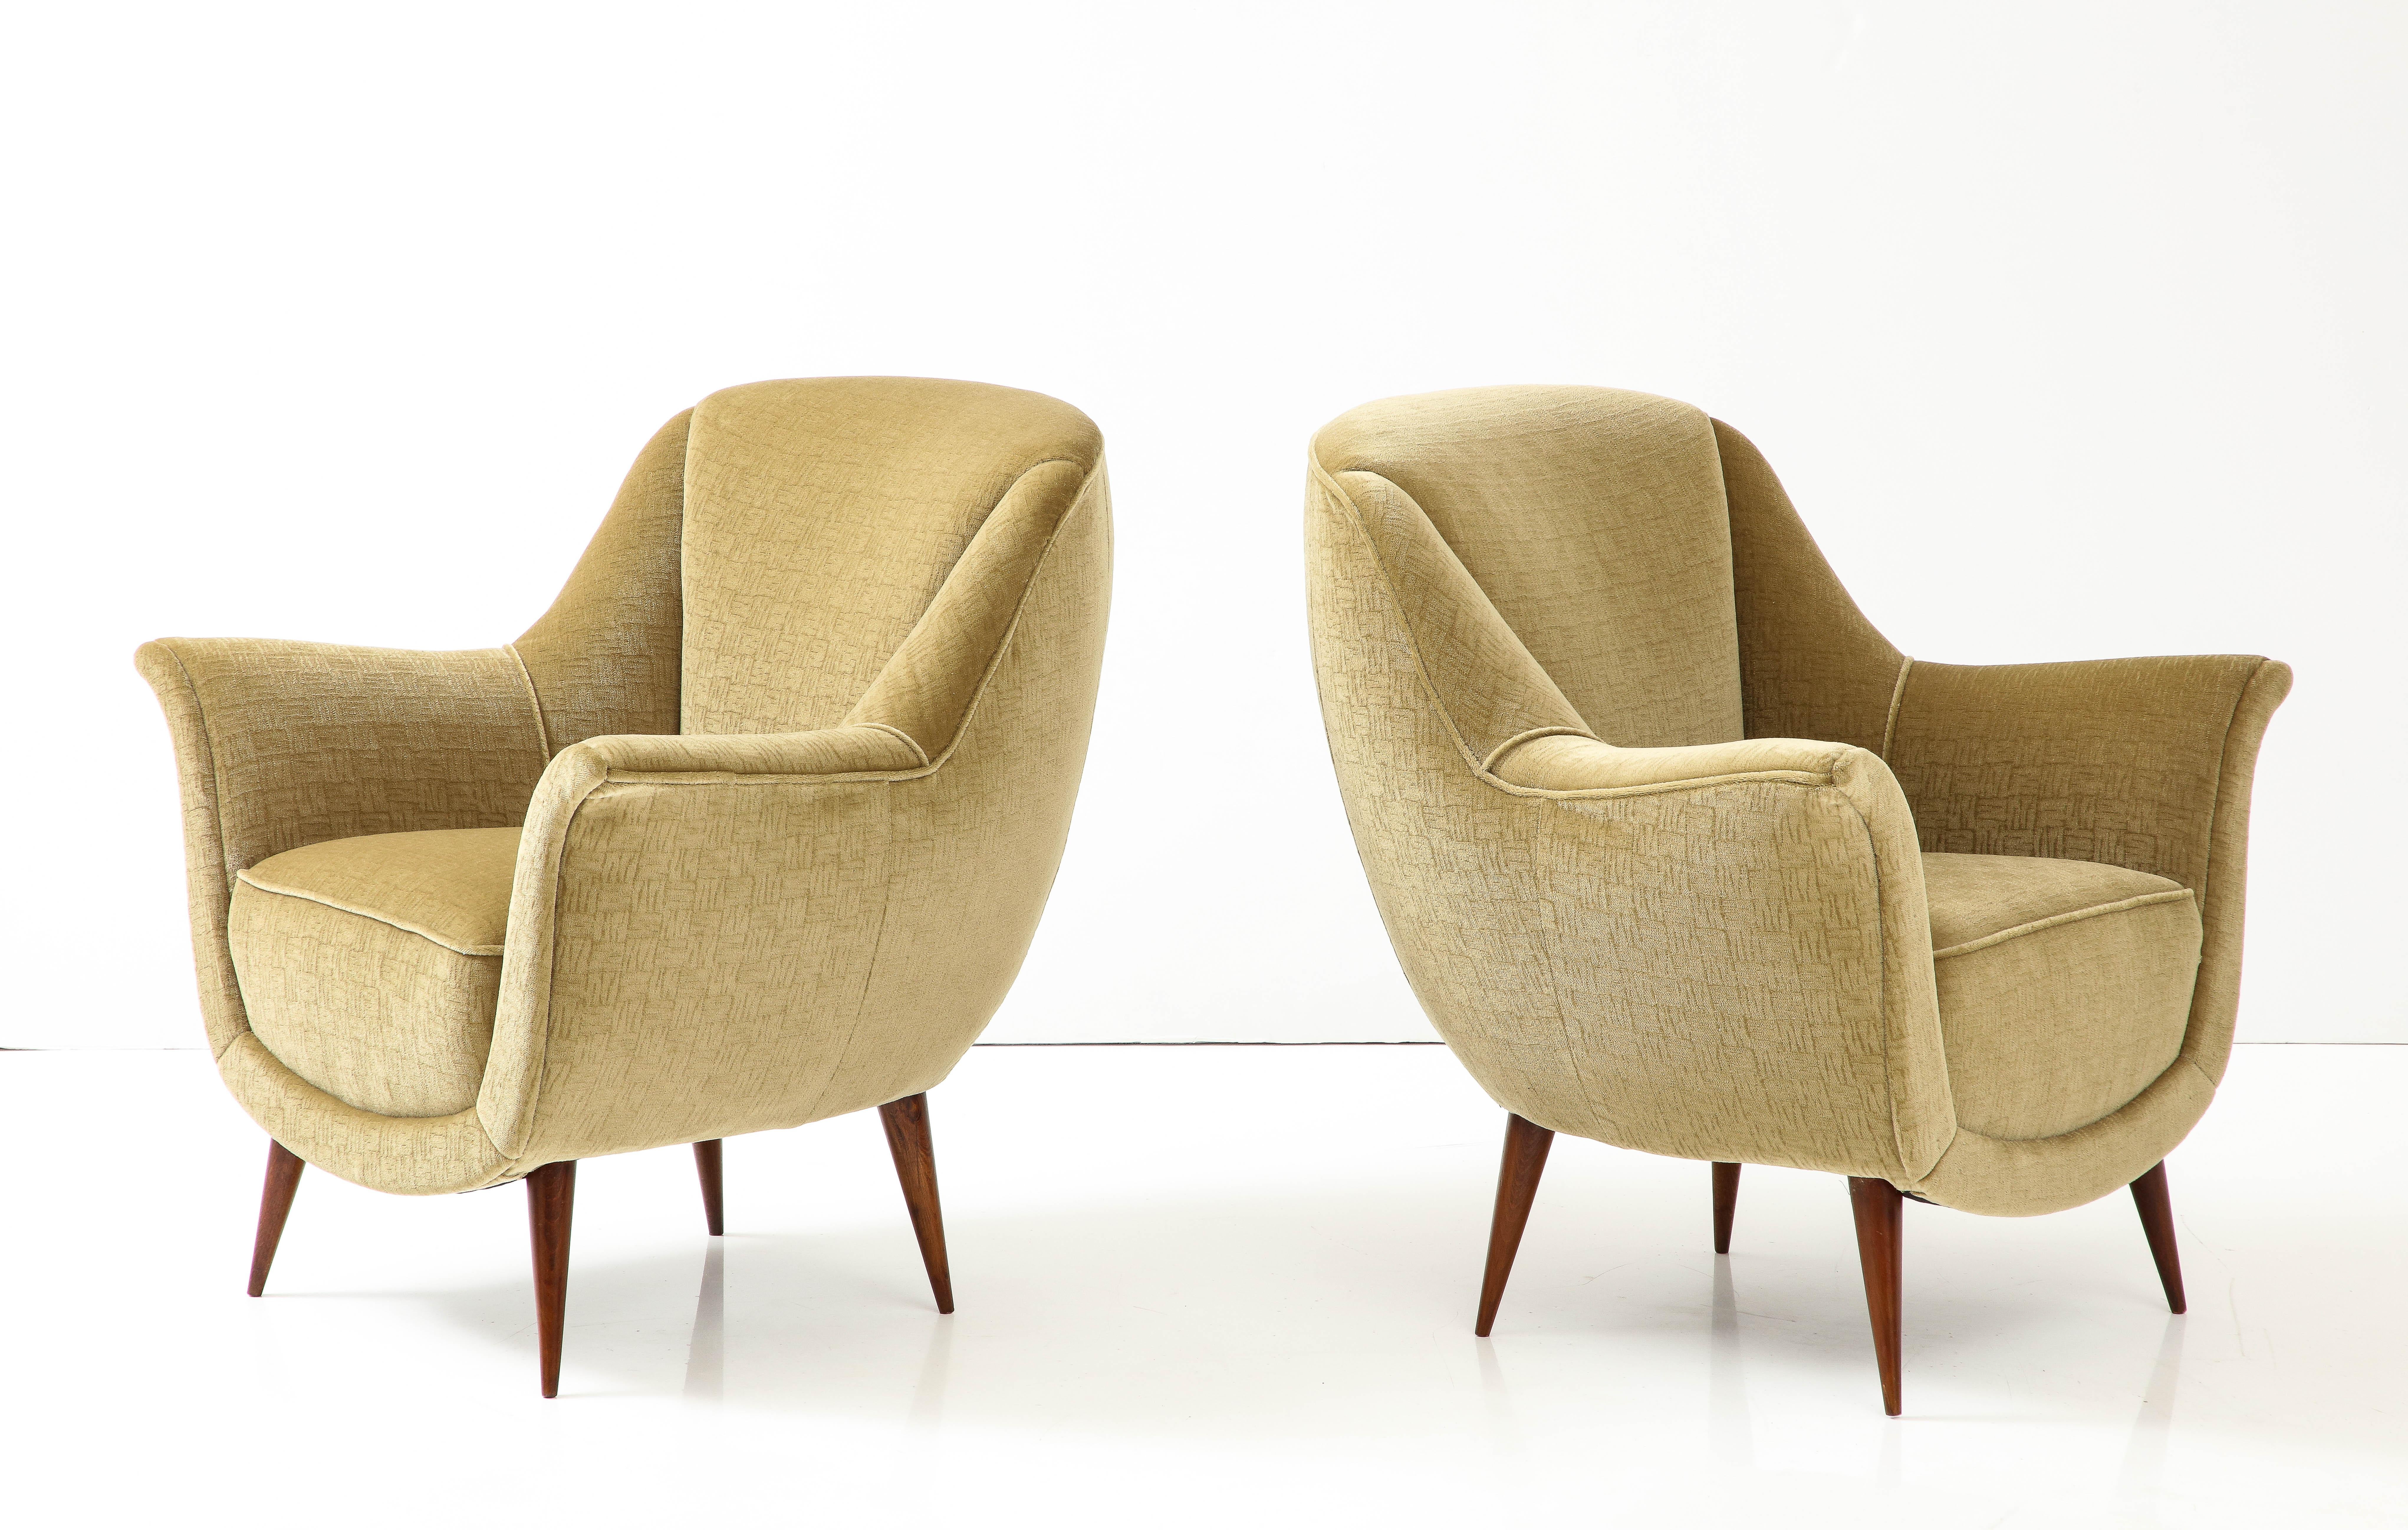 1950's Modernist Gio Ponti Style Italian Lounge Chairs In Mohair Polsterung im Zustand „Gut“ im Angebot in New York, NY